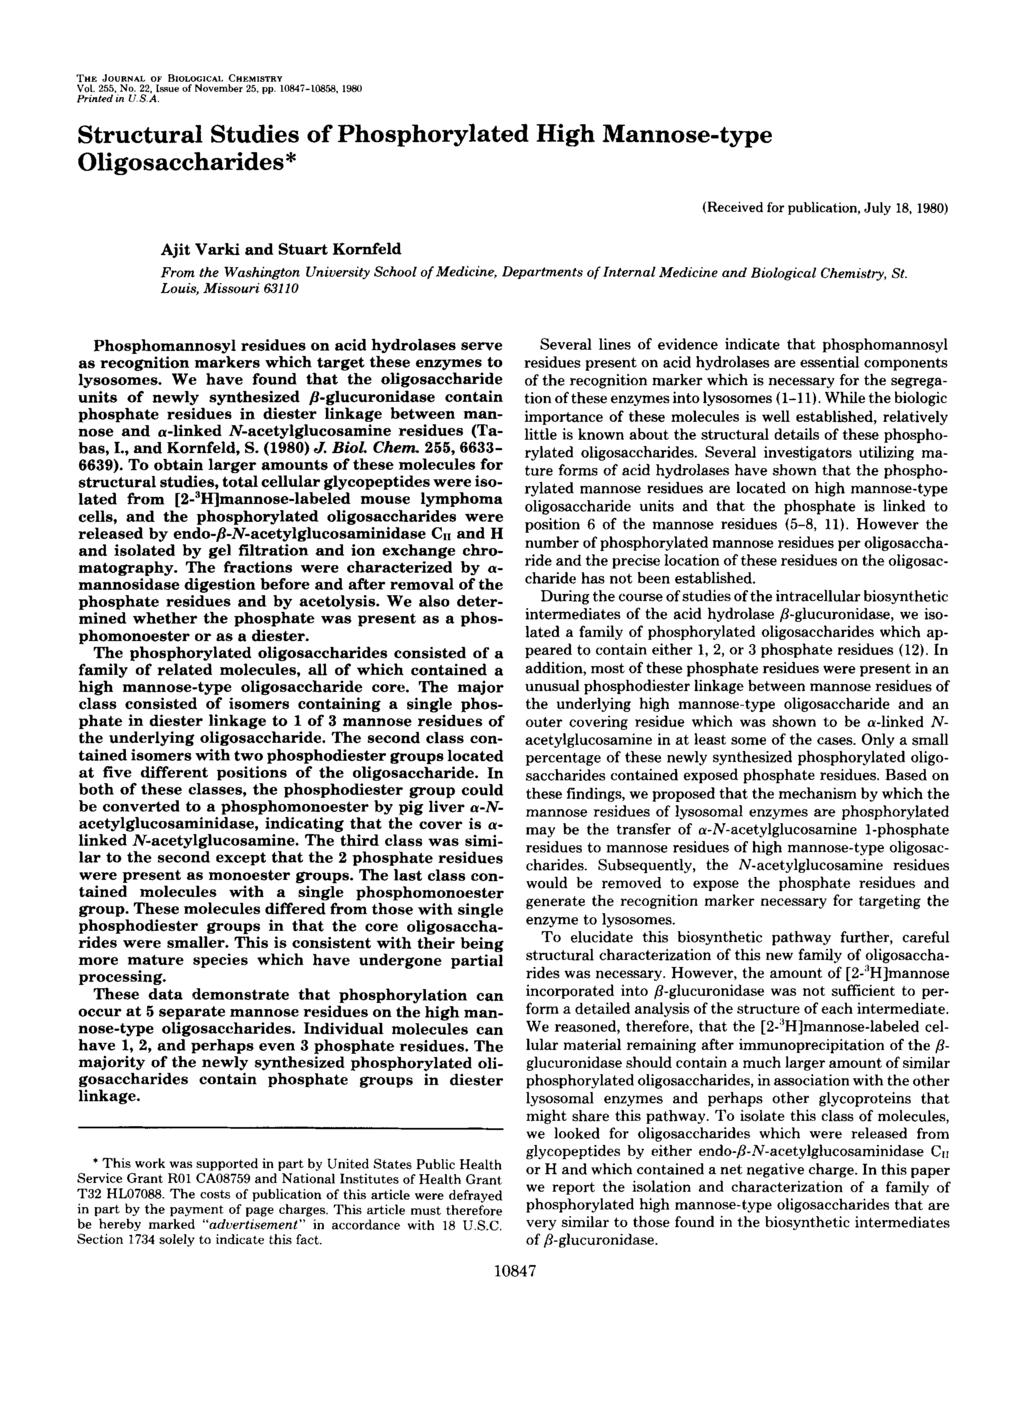 THE JOURNAL OF BOLOGCAL CHEMlSTRY Vol. 255. No. 22, ssue of November 25, pp. 1084i-10858, 1980 Printed in U SA.